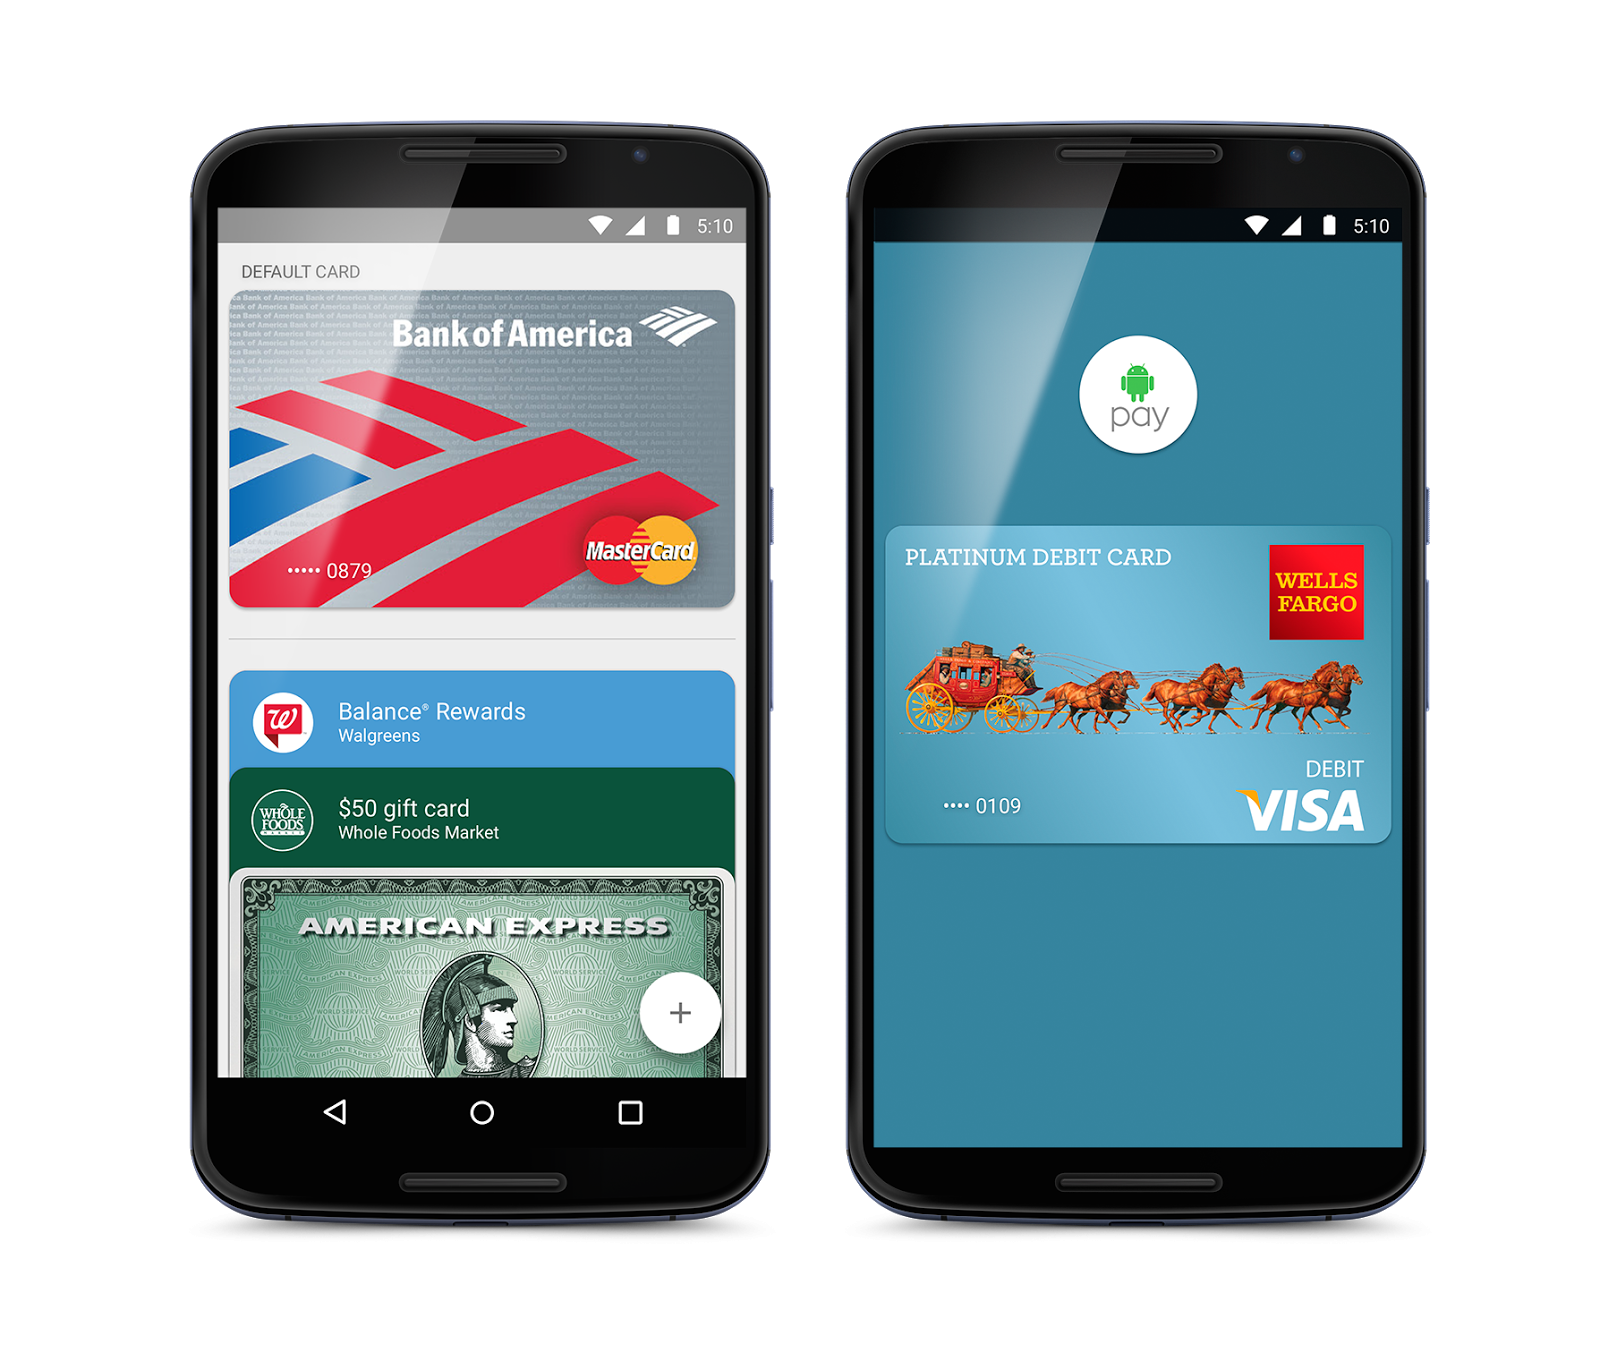 android-pay-is-taking-its-fight-against-apple-pay-international-image-cultofandroidcomwp-contentuploads201509Android-Pay-png